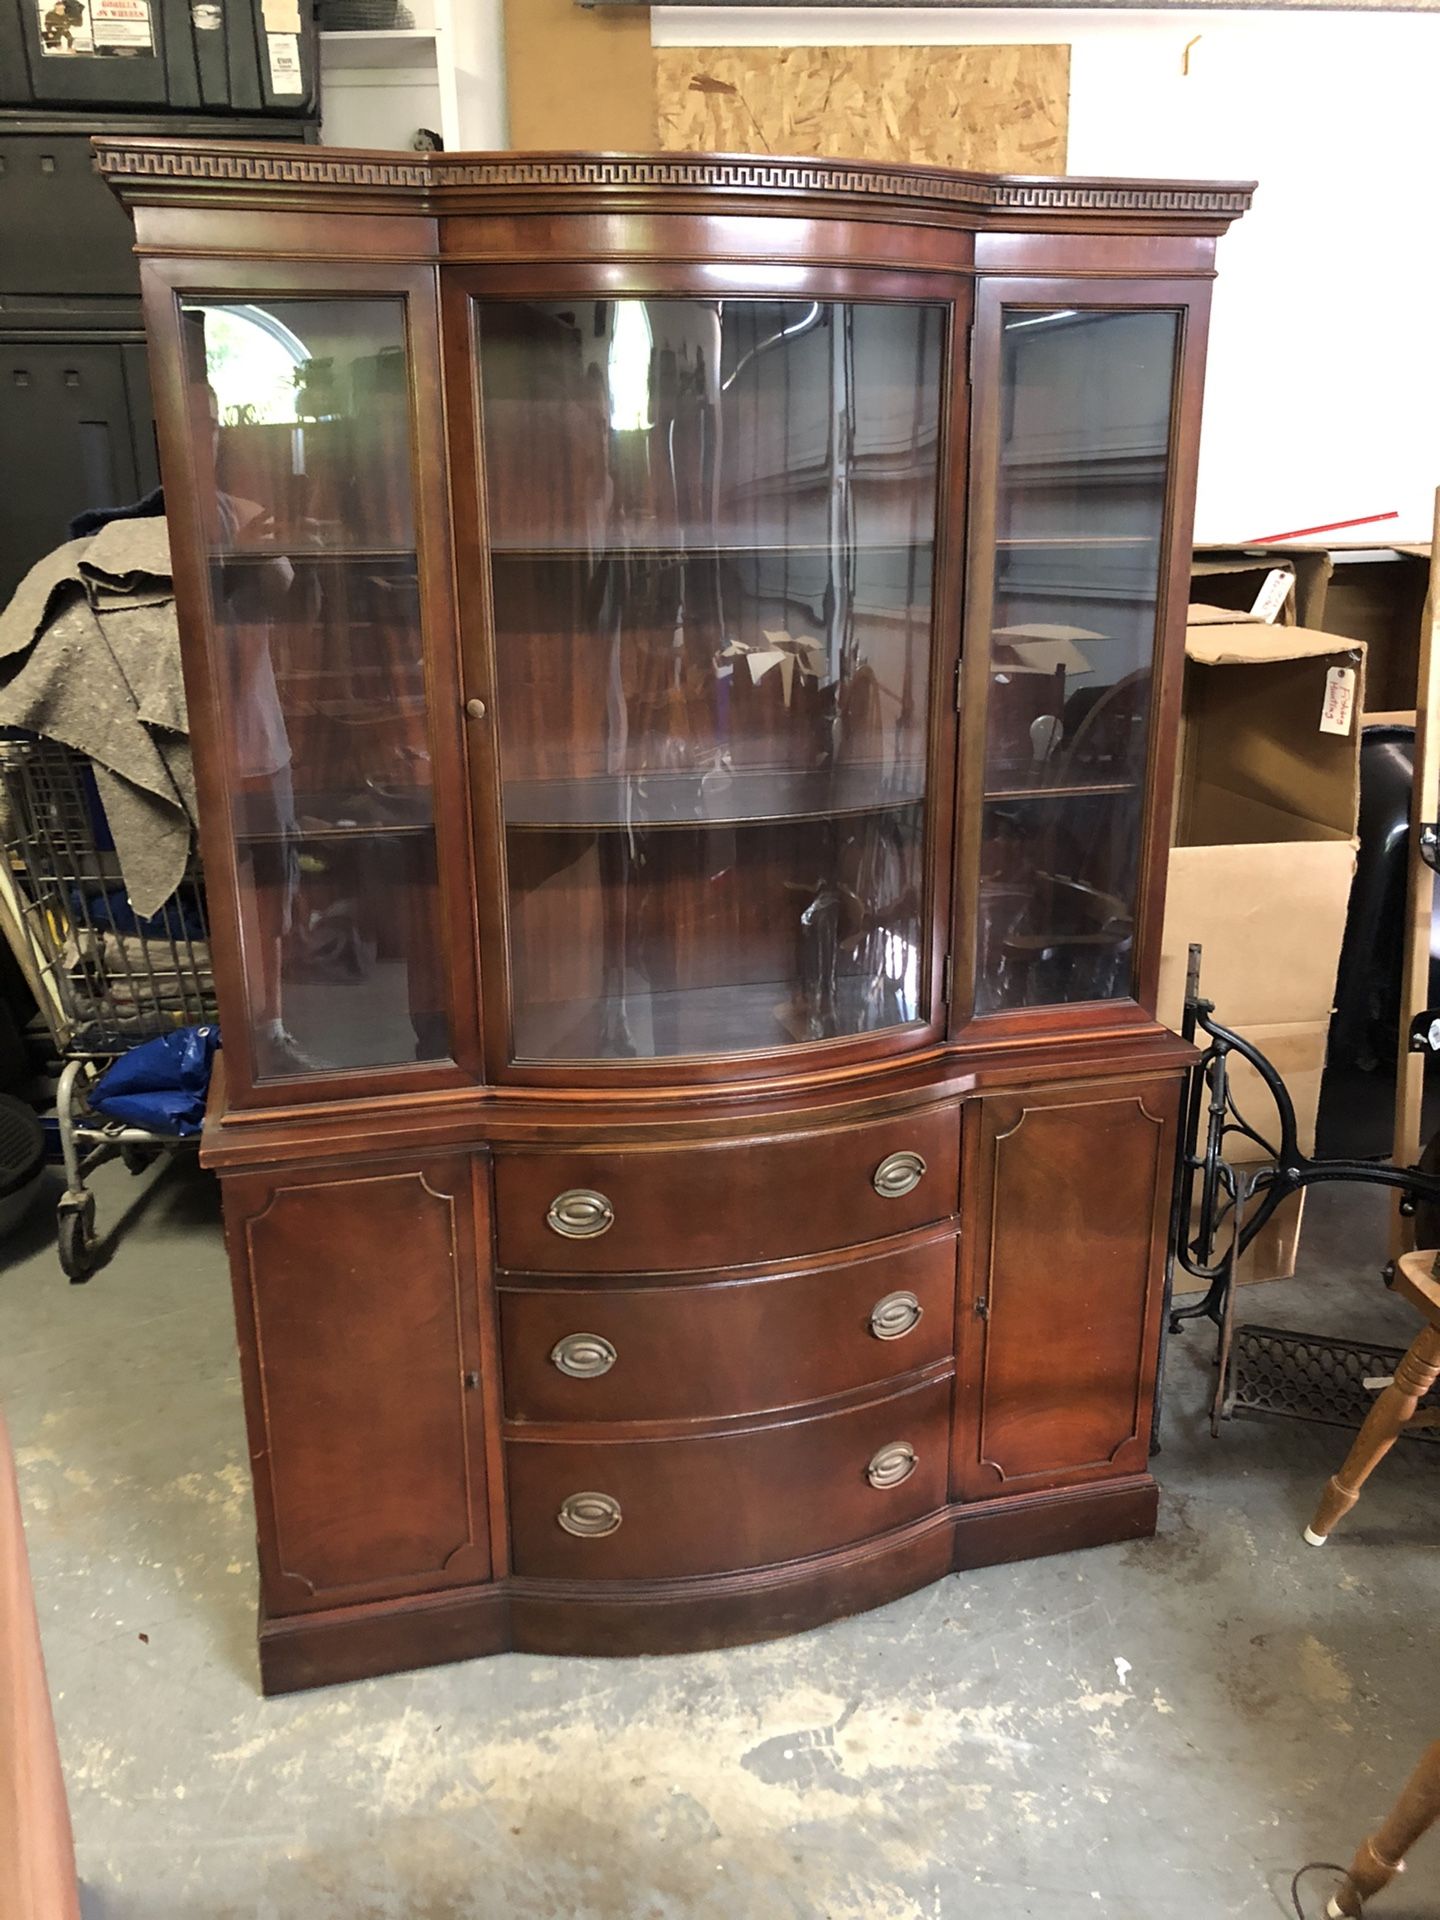 Drexel Travis court collection cherry Duncan Phyfe China cabinet. One solid piece 3 drawers 2 cabinets 2 shelves. glass in good condition. It’s been